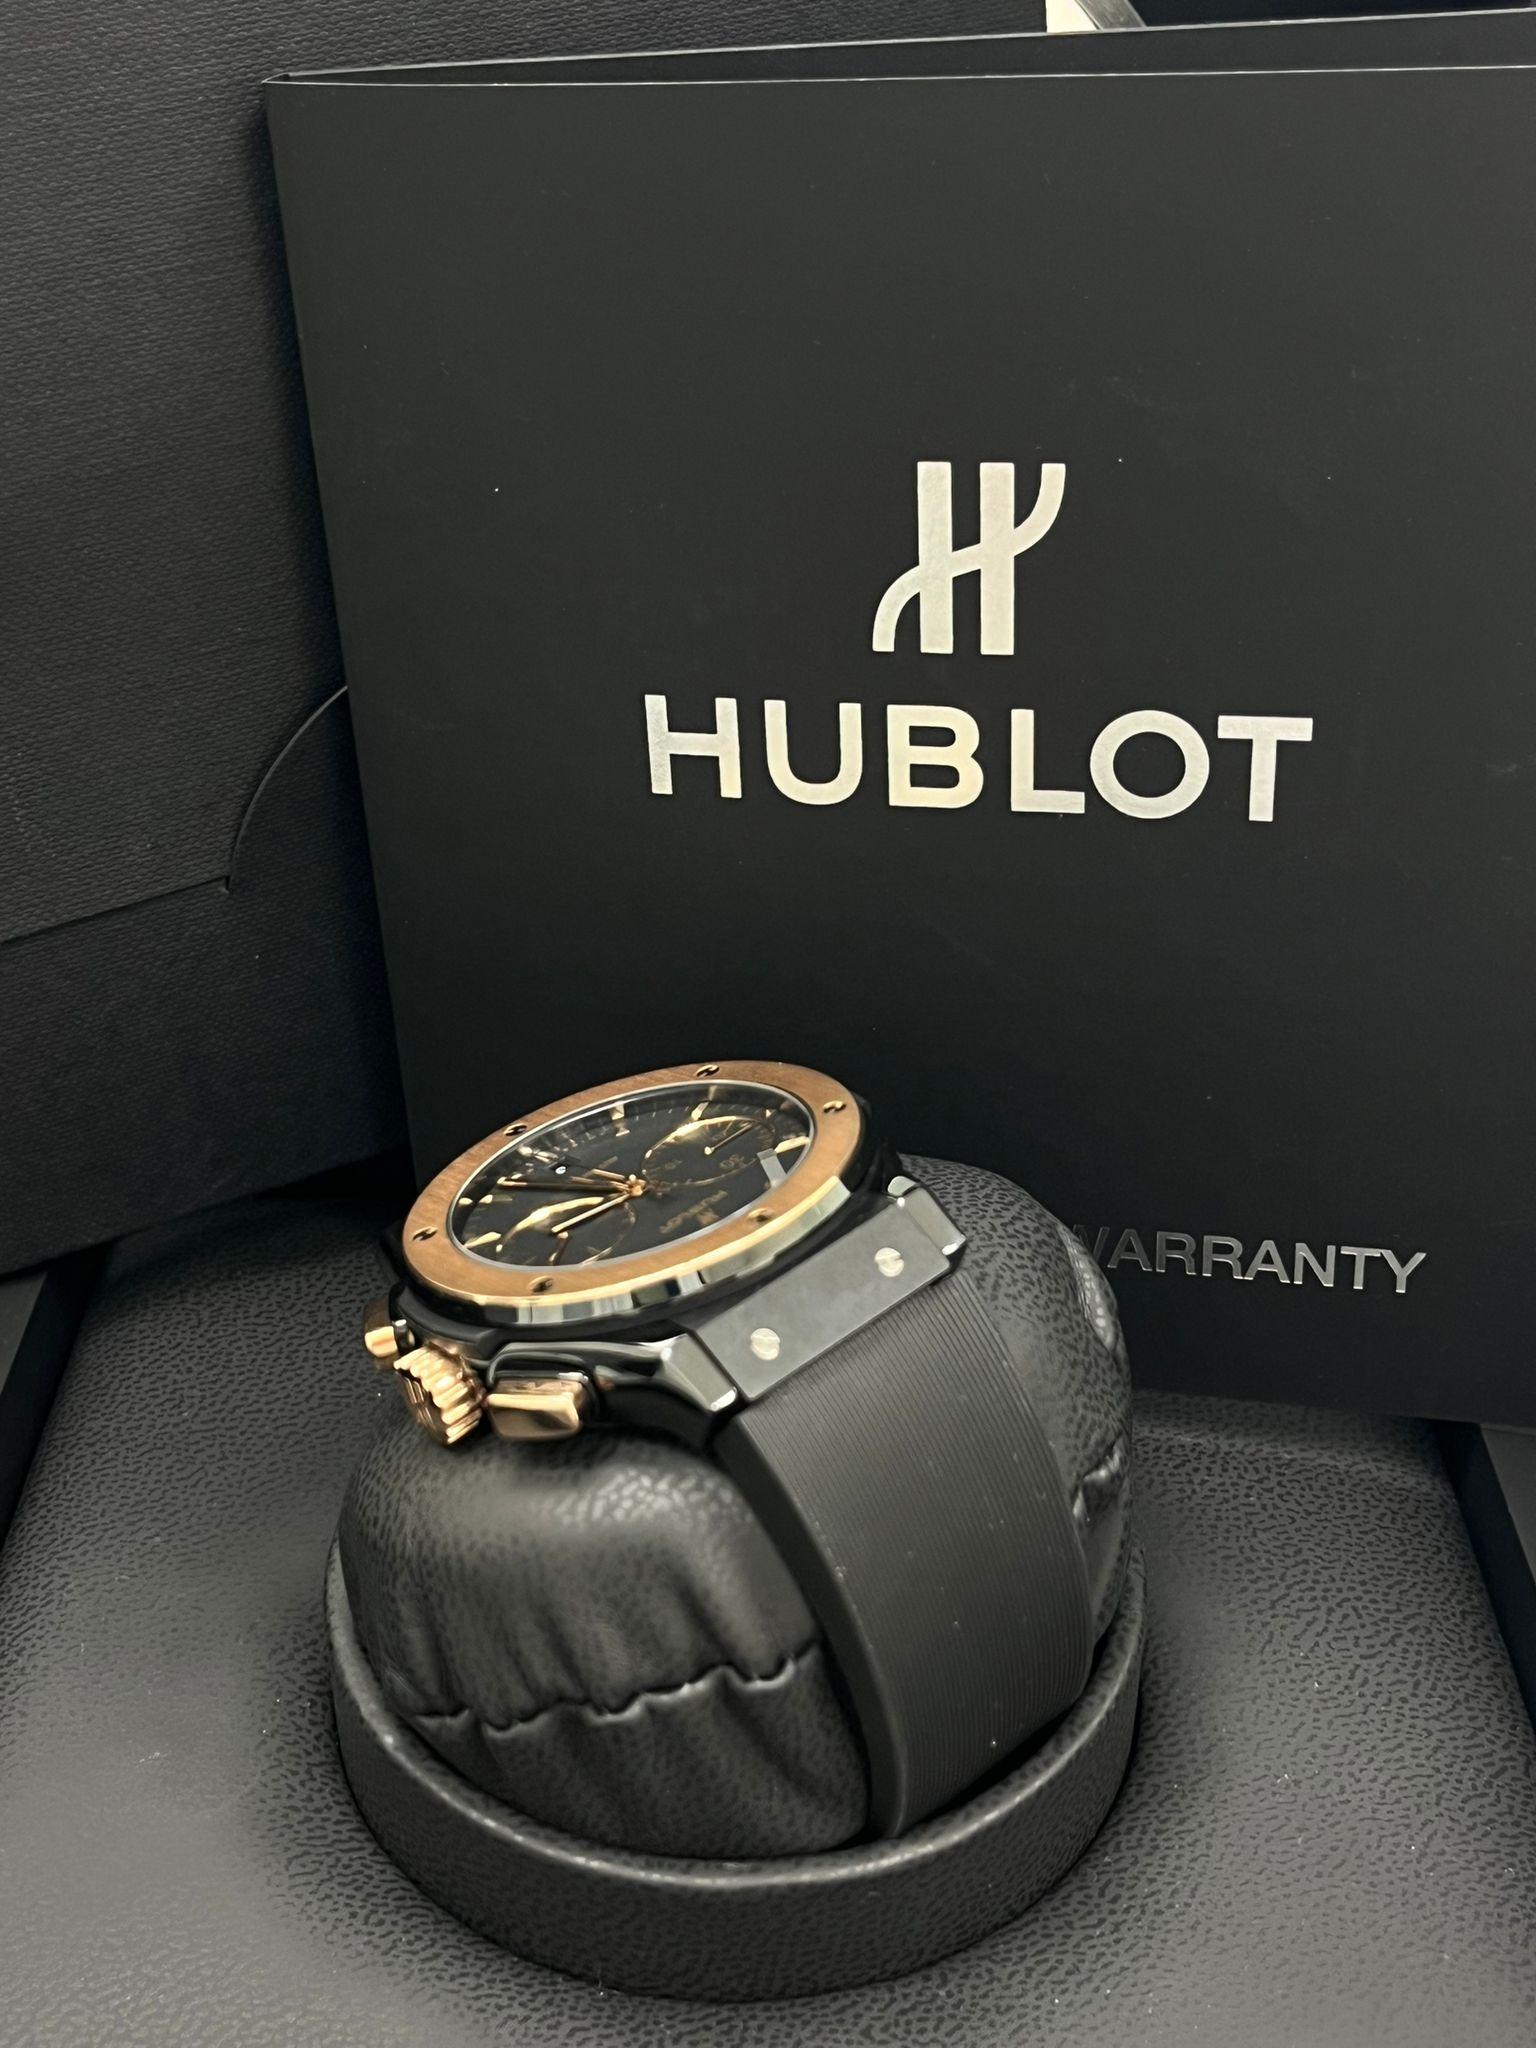 Hublot Classic Fusion Chronograph Ceramic King Gold 45mm Watch 521.CO.1181.RX For Sale 9